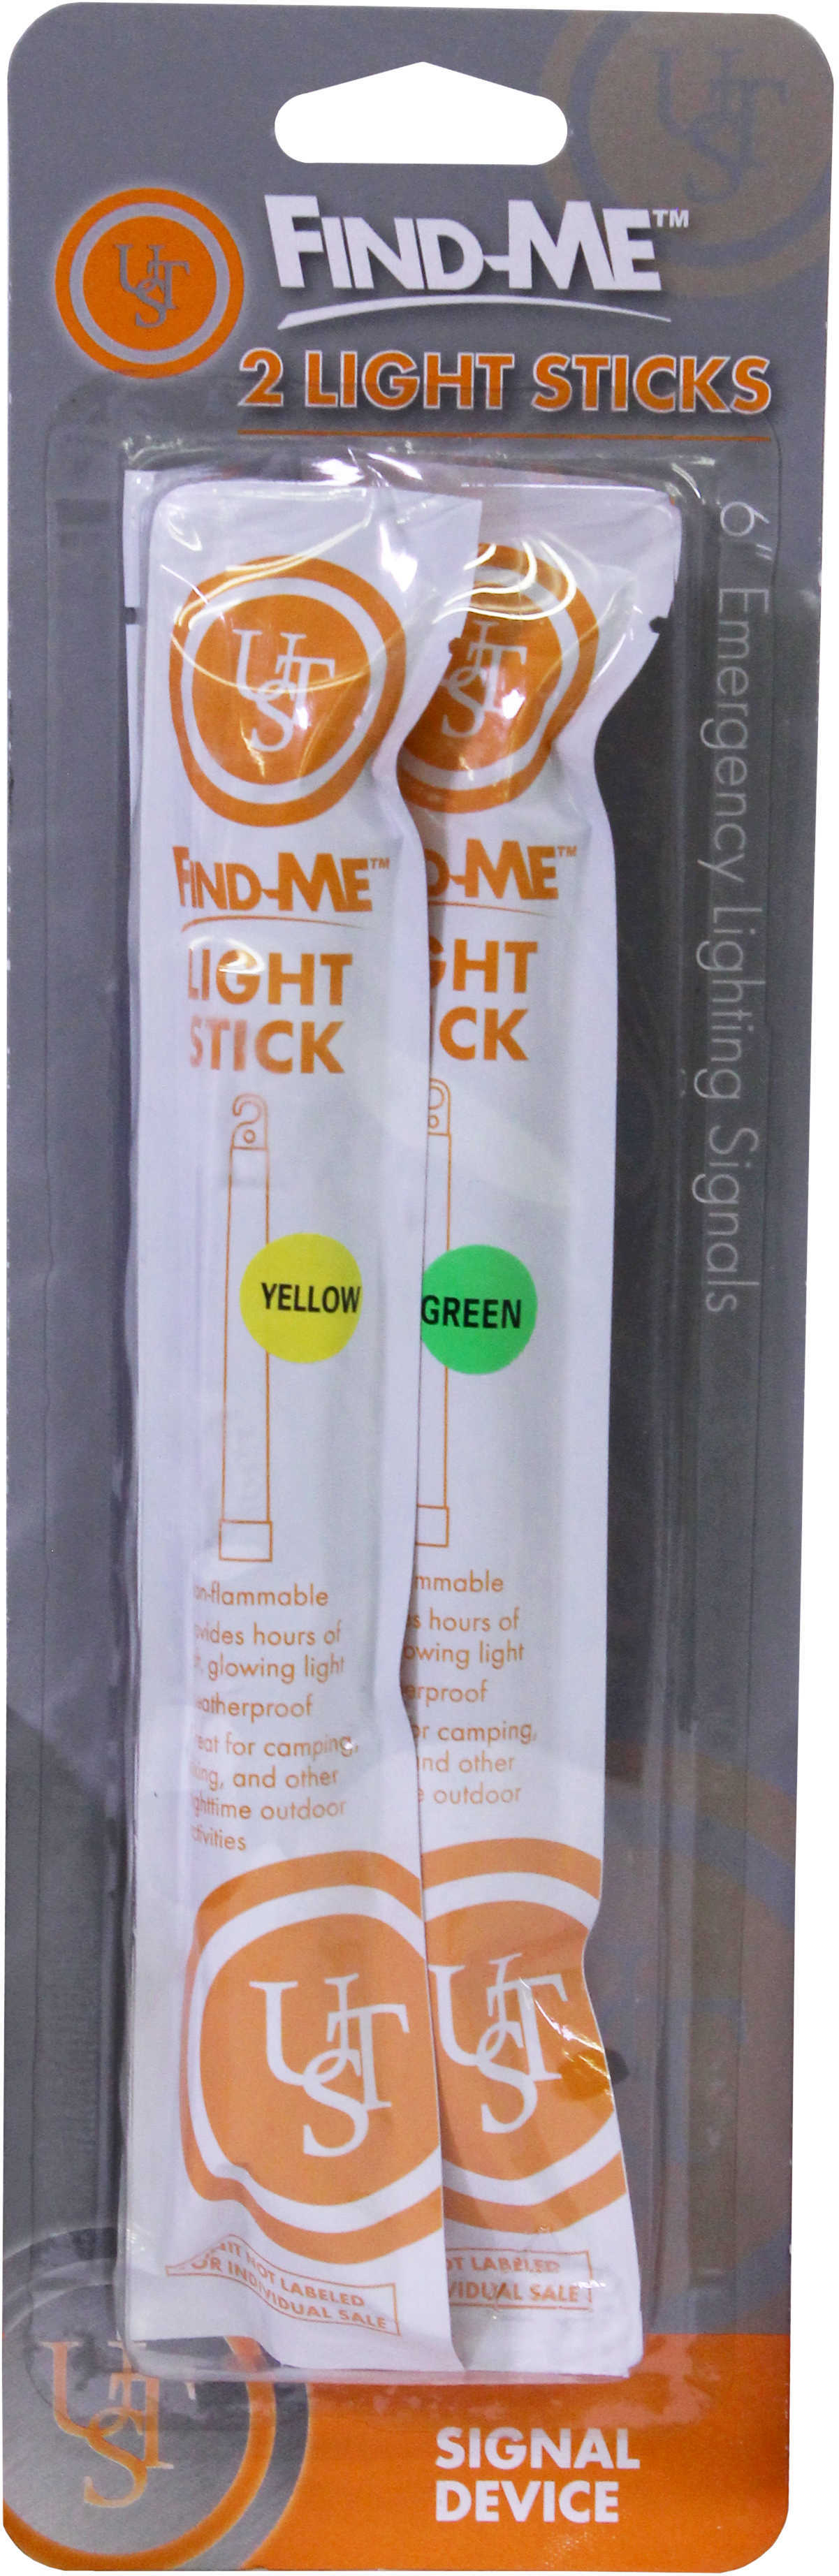 Ultimate Survival Technologies 6" Find-Me Light Stick Assorted Colors, 2 Pack Md: 20-310-110